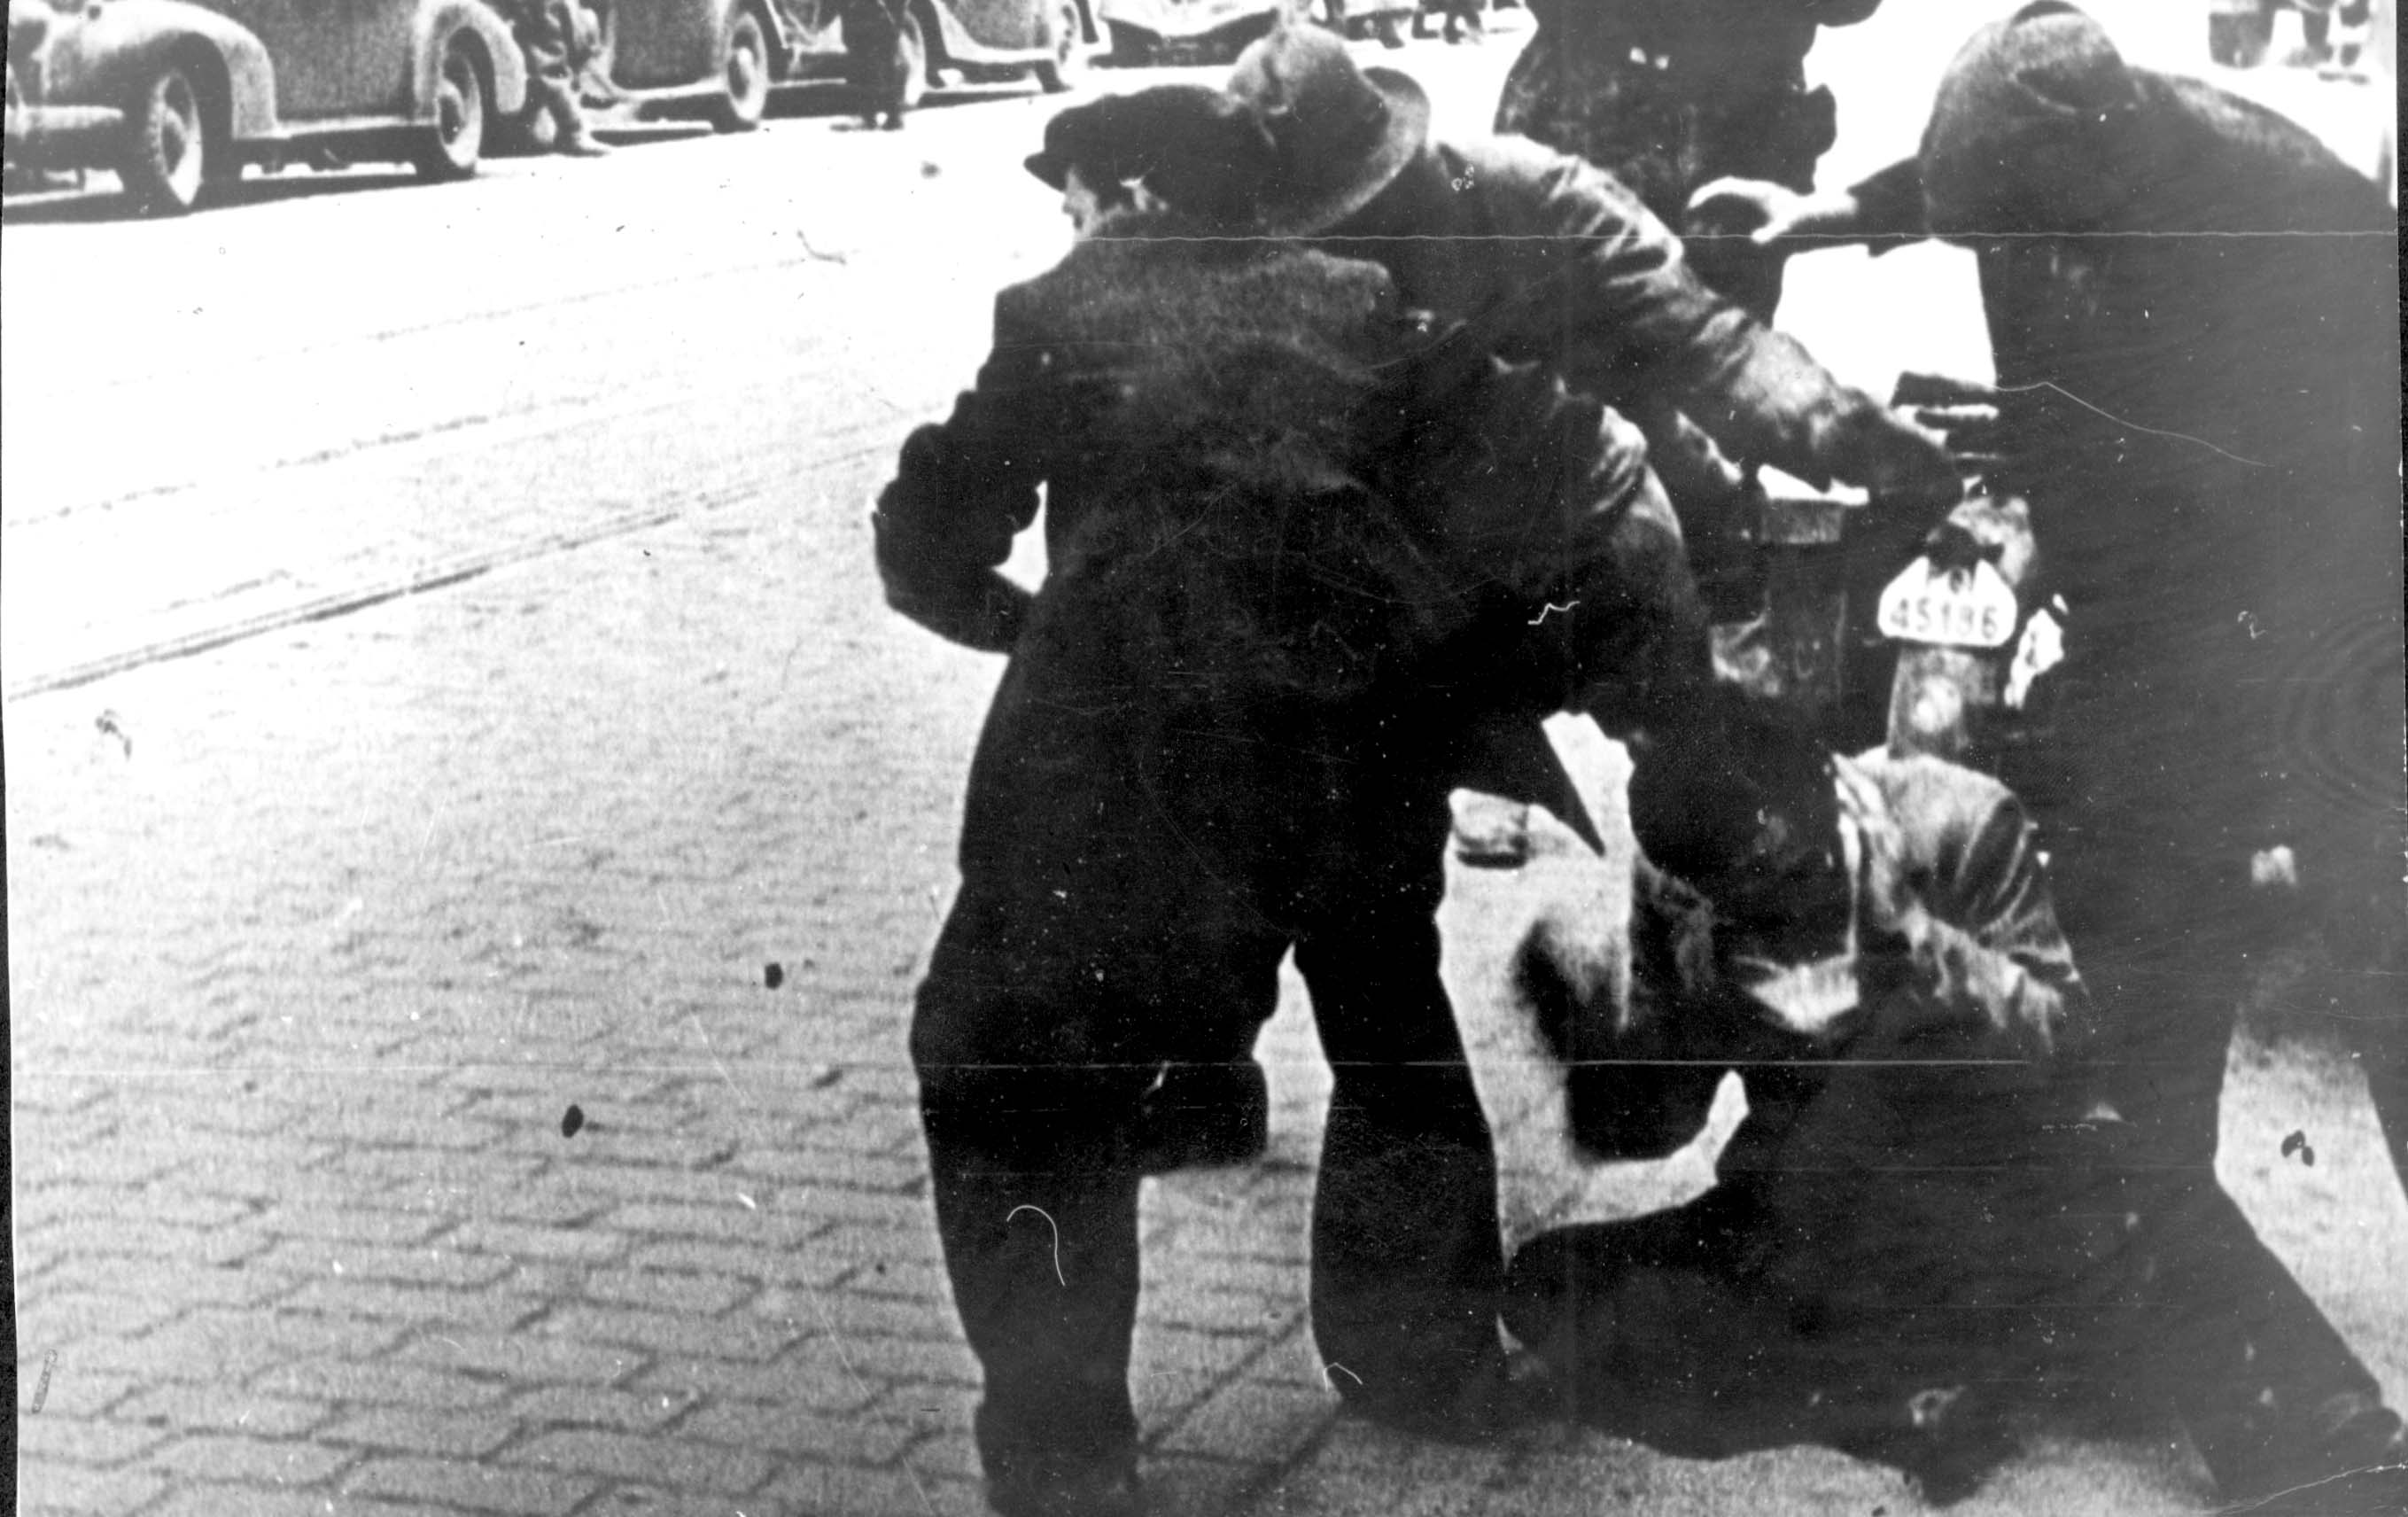 Beating of a Jew during the June 30-July 1, 1941 pogrom